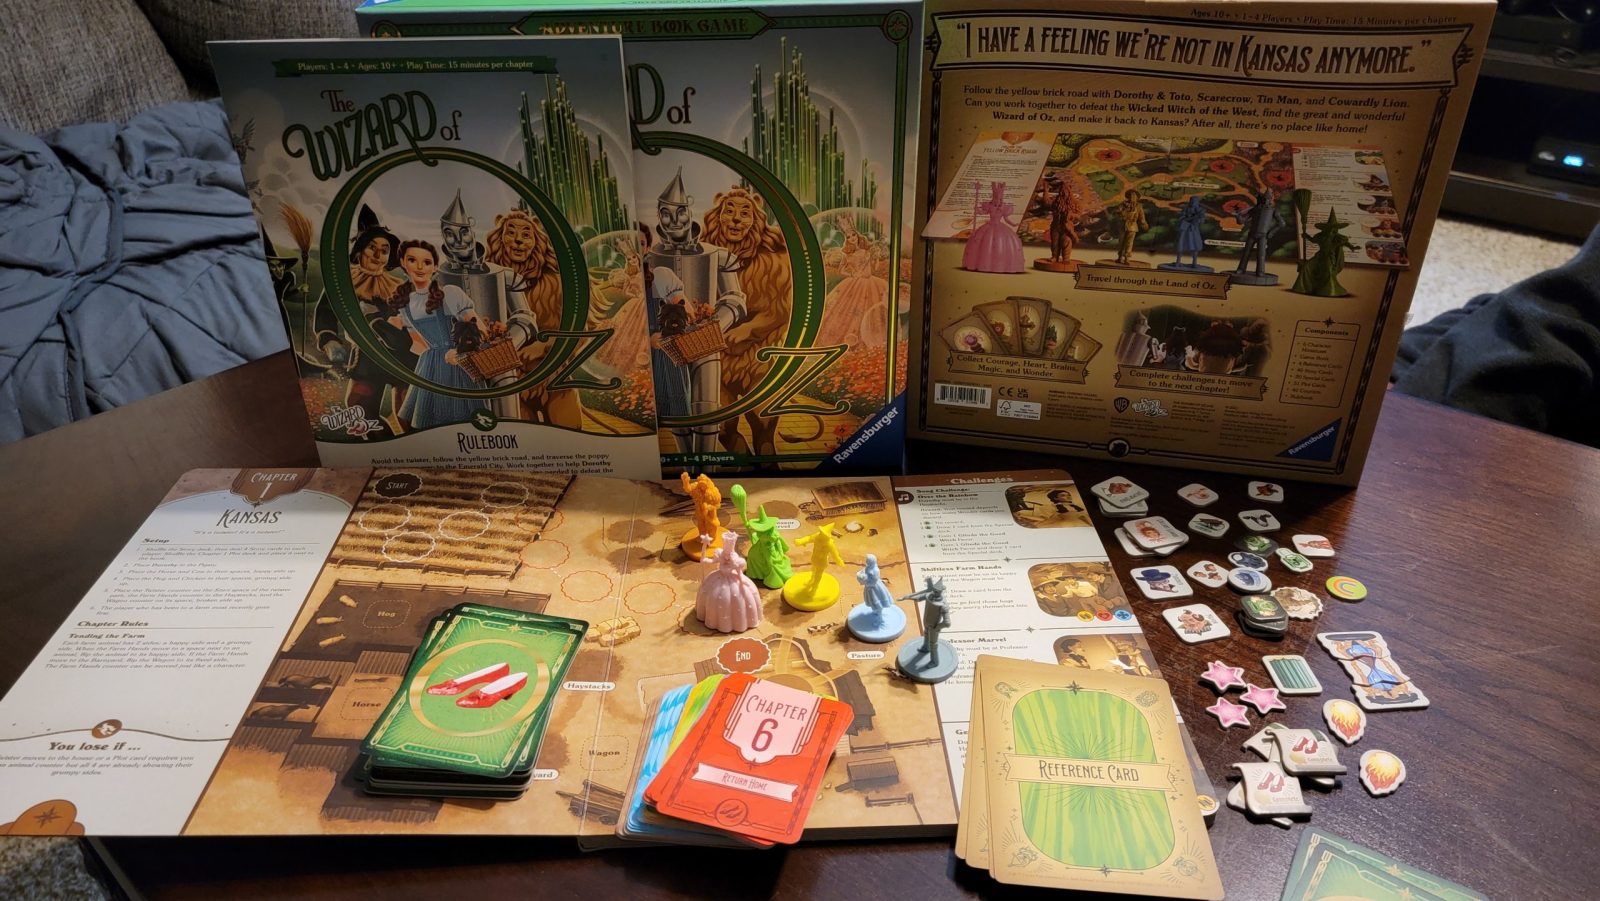 The Wizard of OZ board game will challenge your courage, brains and heart